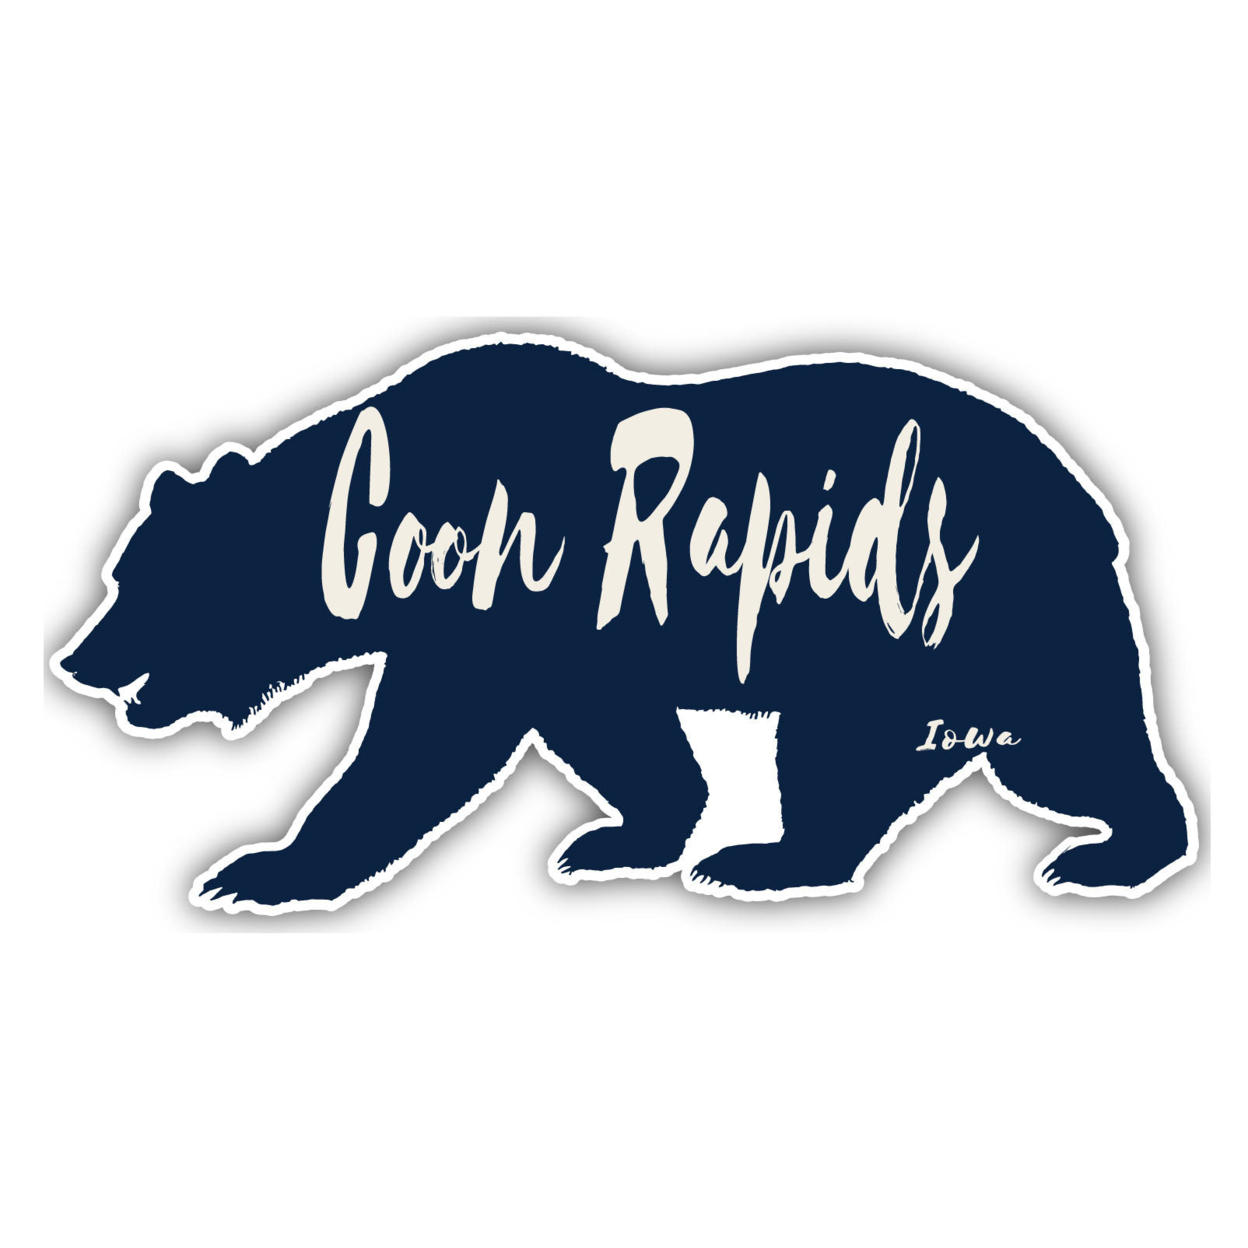 Coon Rapids Iowa Souvenir Decorative Stickers (Choose Theme And Size) - 4-Pack, 6-Inch, Bear